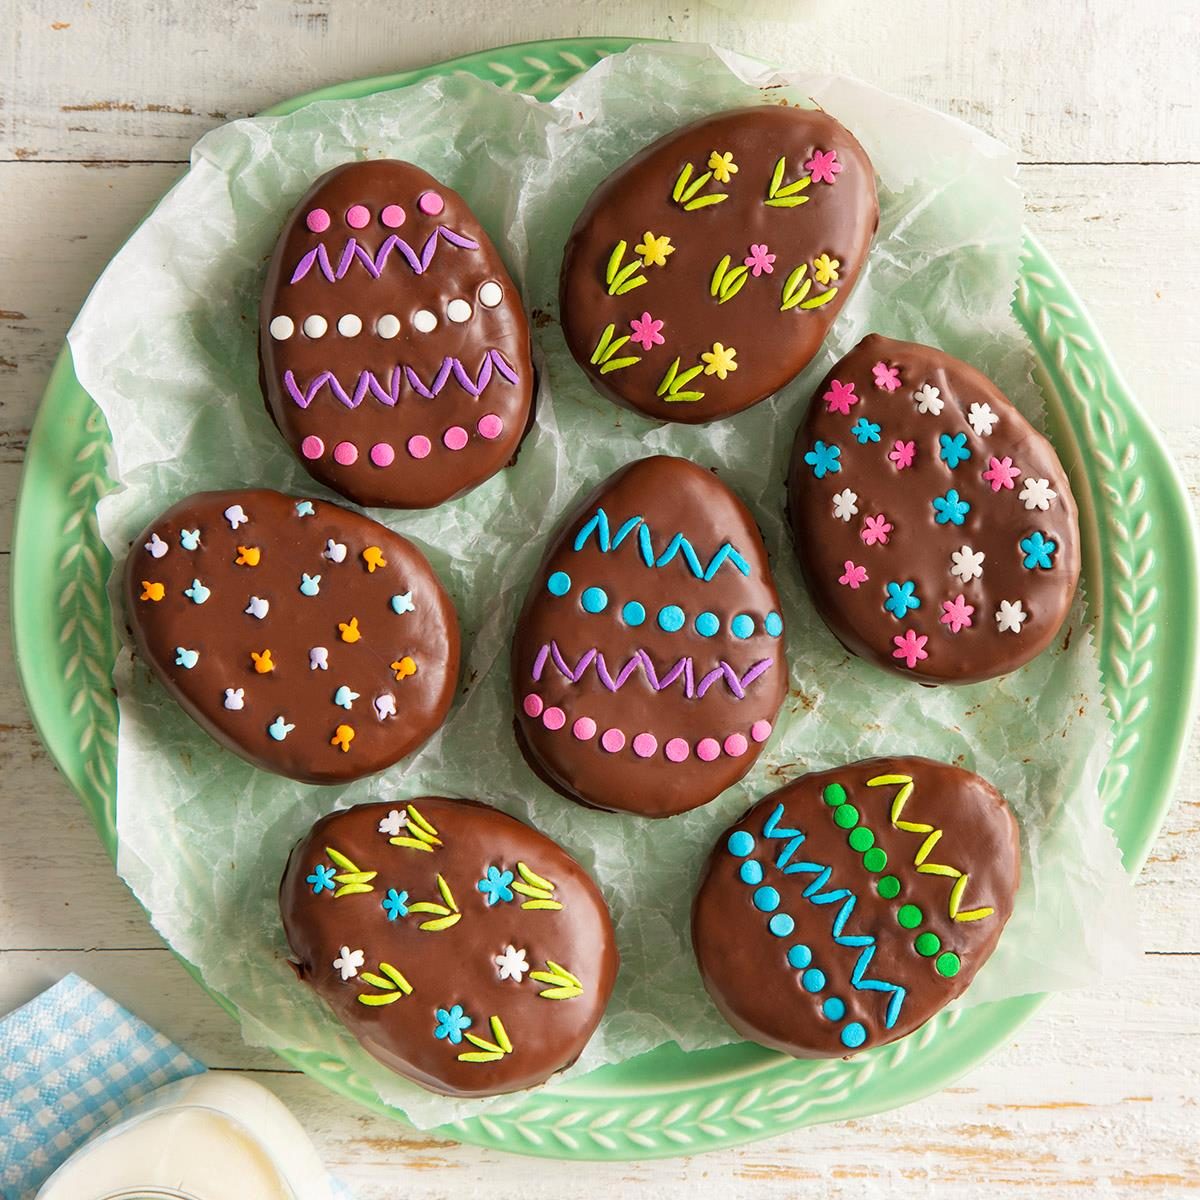 Make this Easy Easter Fudge for a Festive Treat!